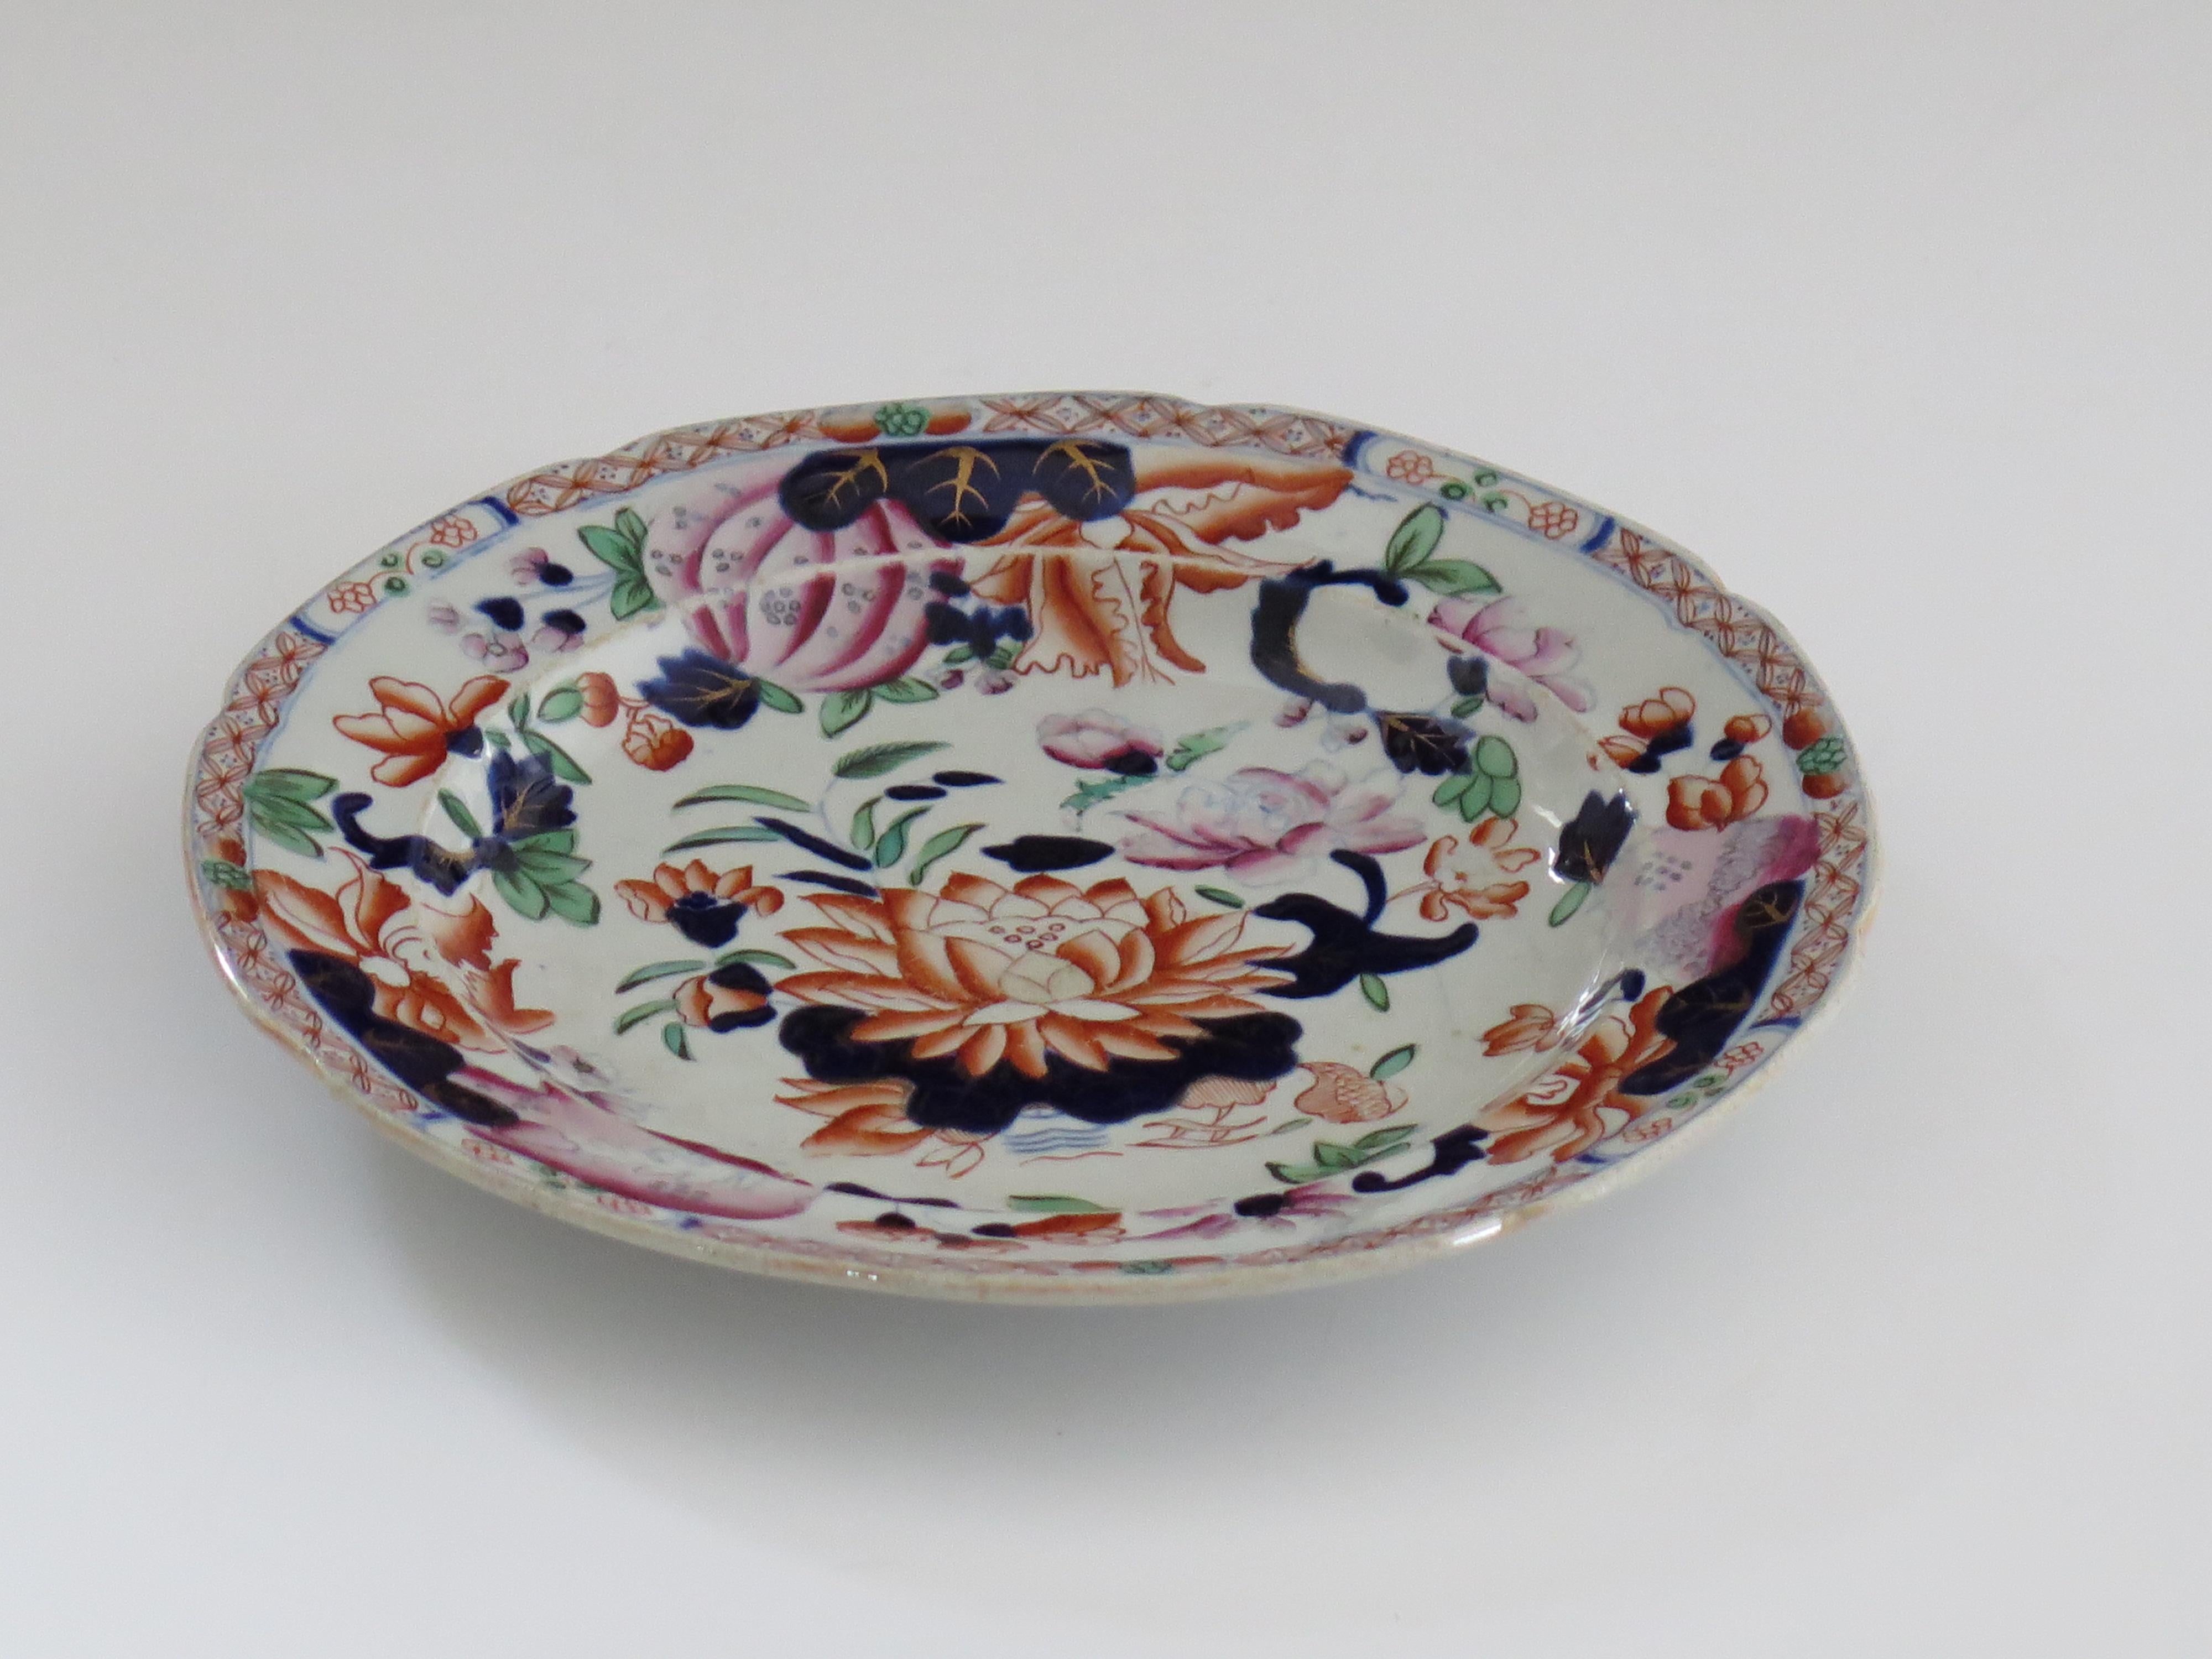 This is a very good Side Plate in the Water Lily pattern, made by Hicks and Meigh of Shelton, Staffordshire, England between 1812 and 1822, probably circa 1815.

This is a beautiful plate with a shaped notched edge to the rim.

The plate has been